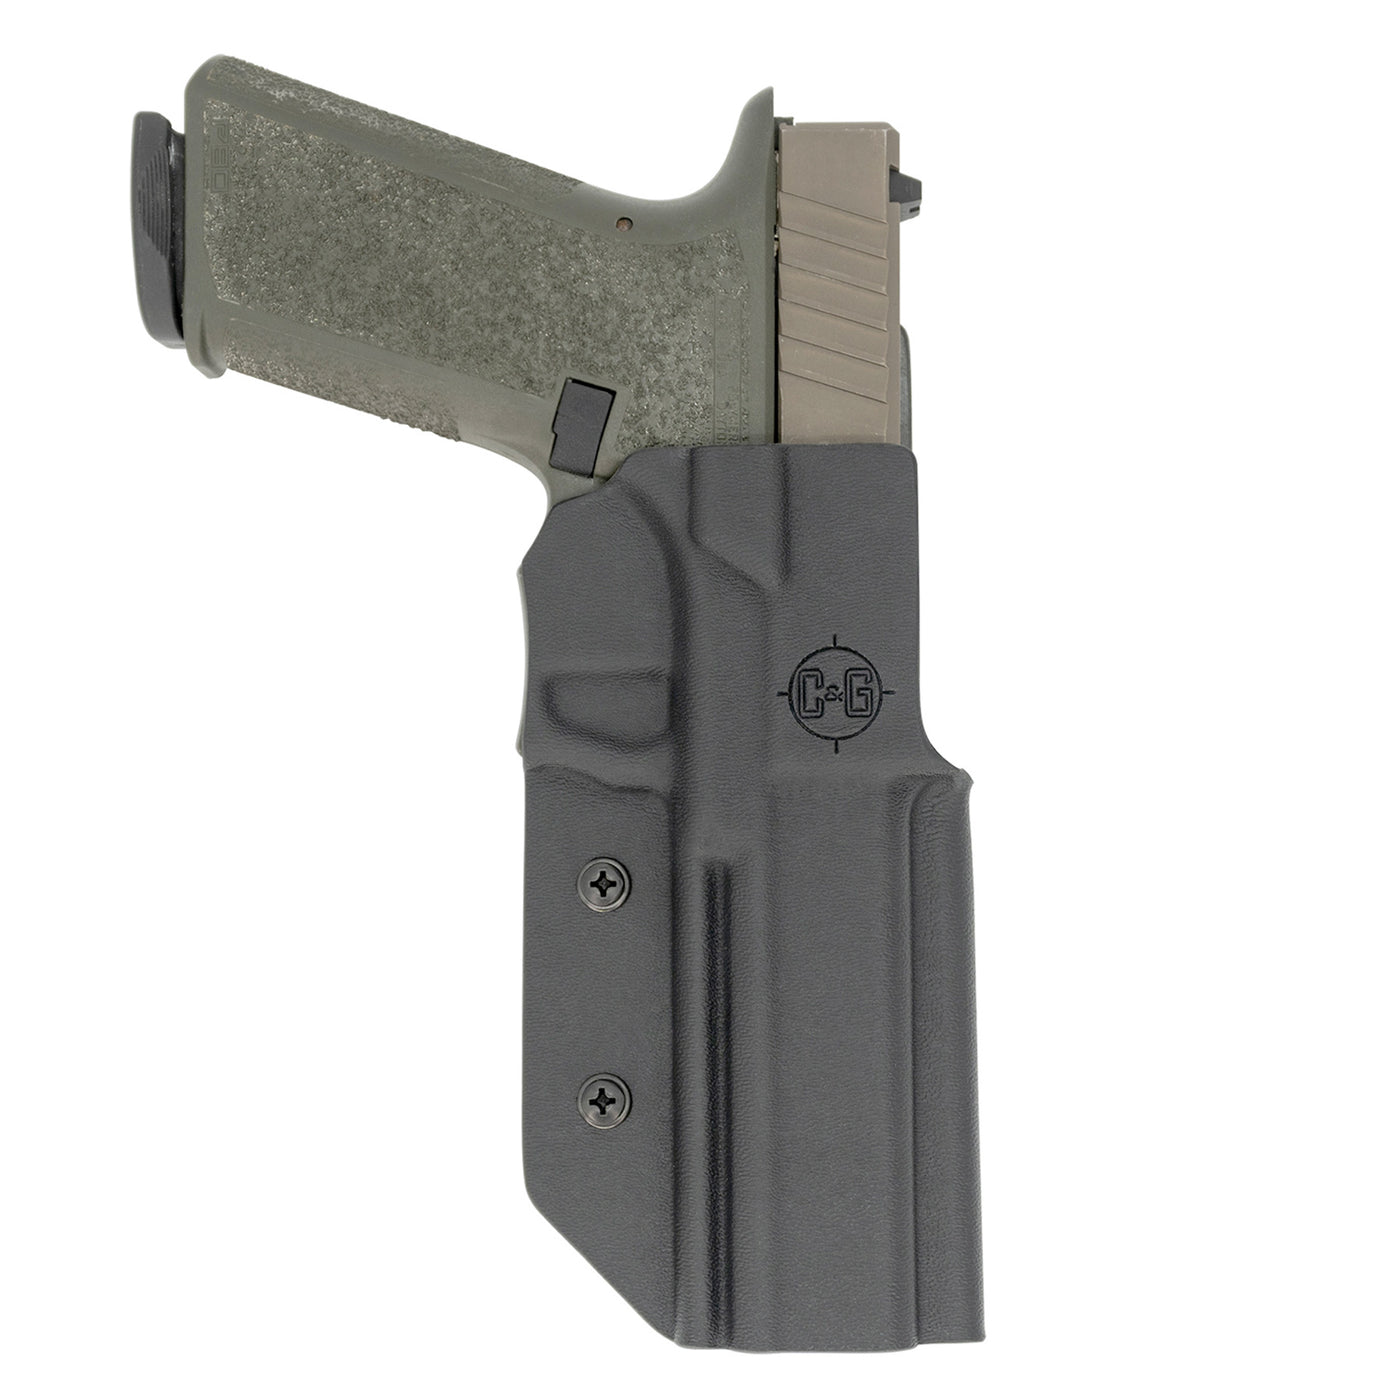 This is the C&G Holsters USPSA and IDPA holster for the Polymer80 PF940V2. Glock 34 length slide.